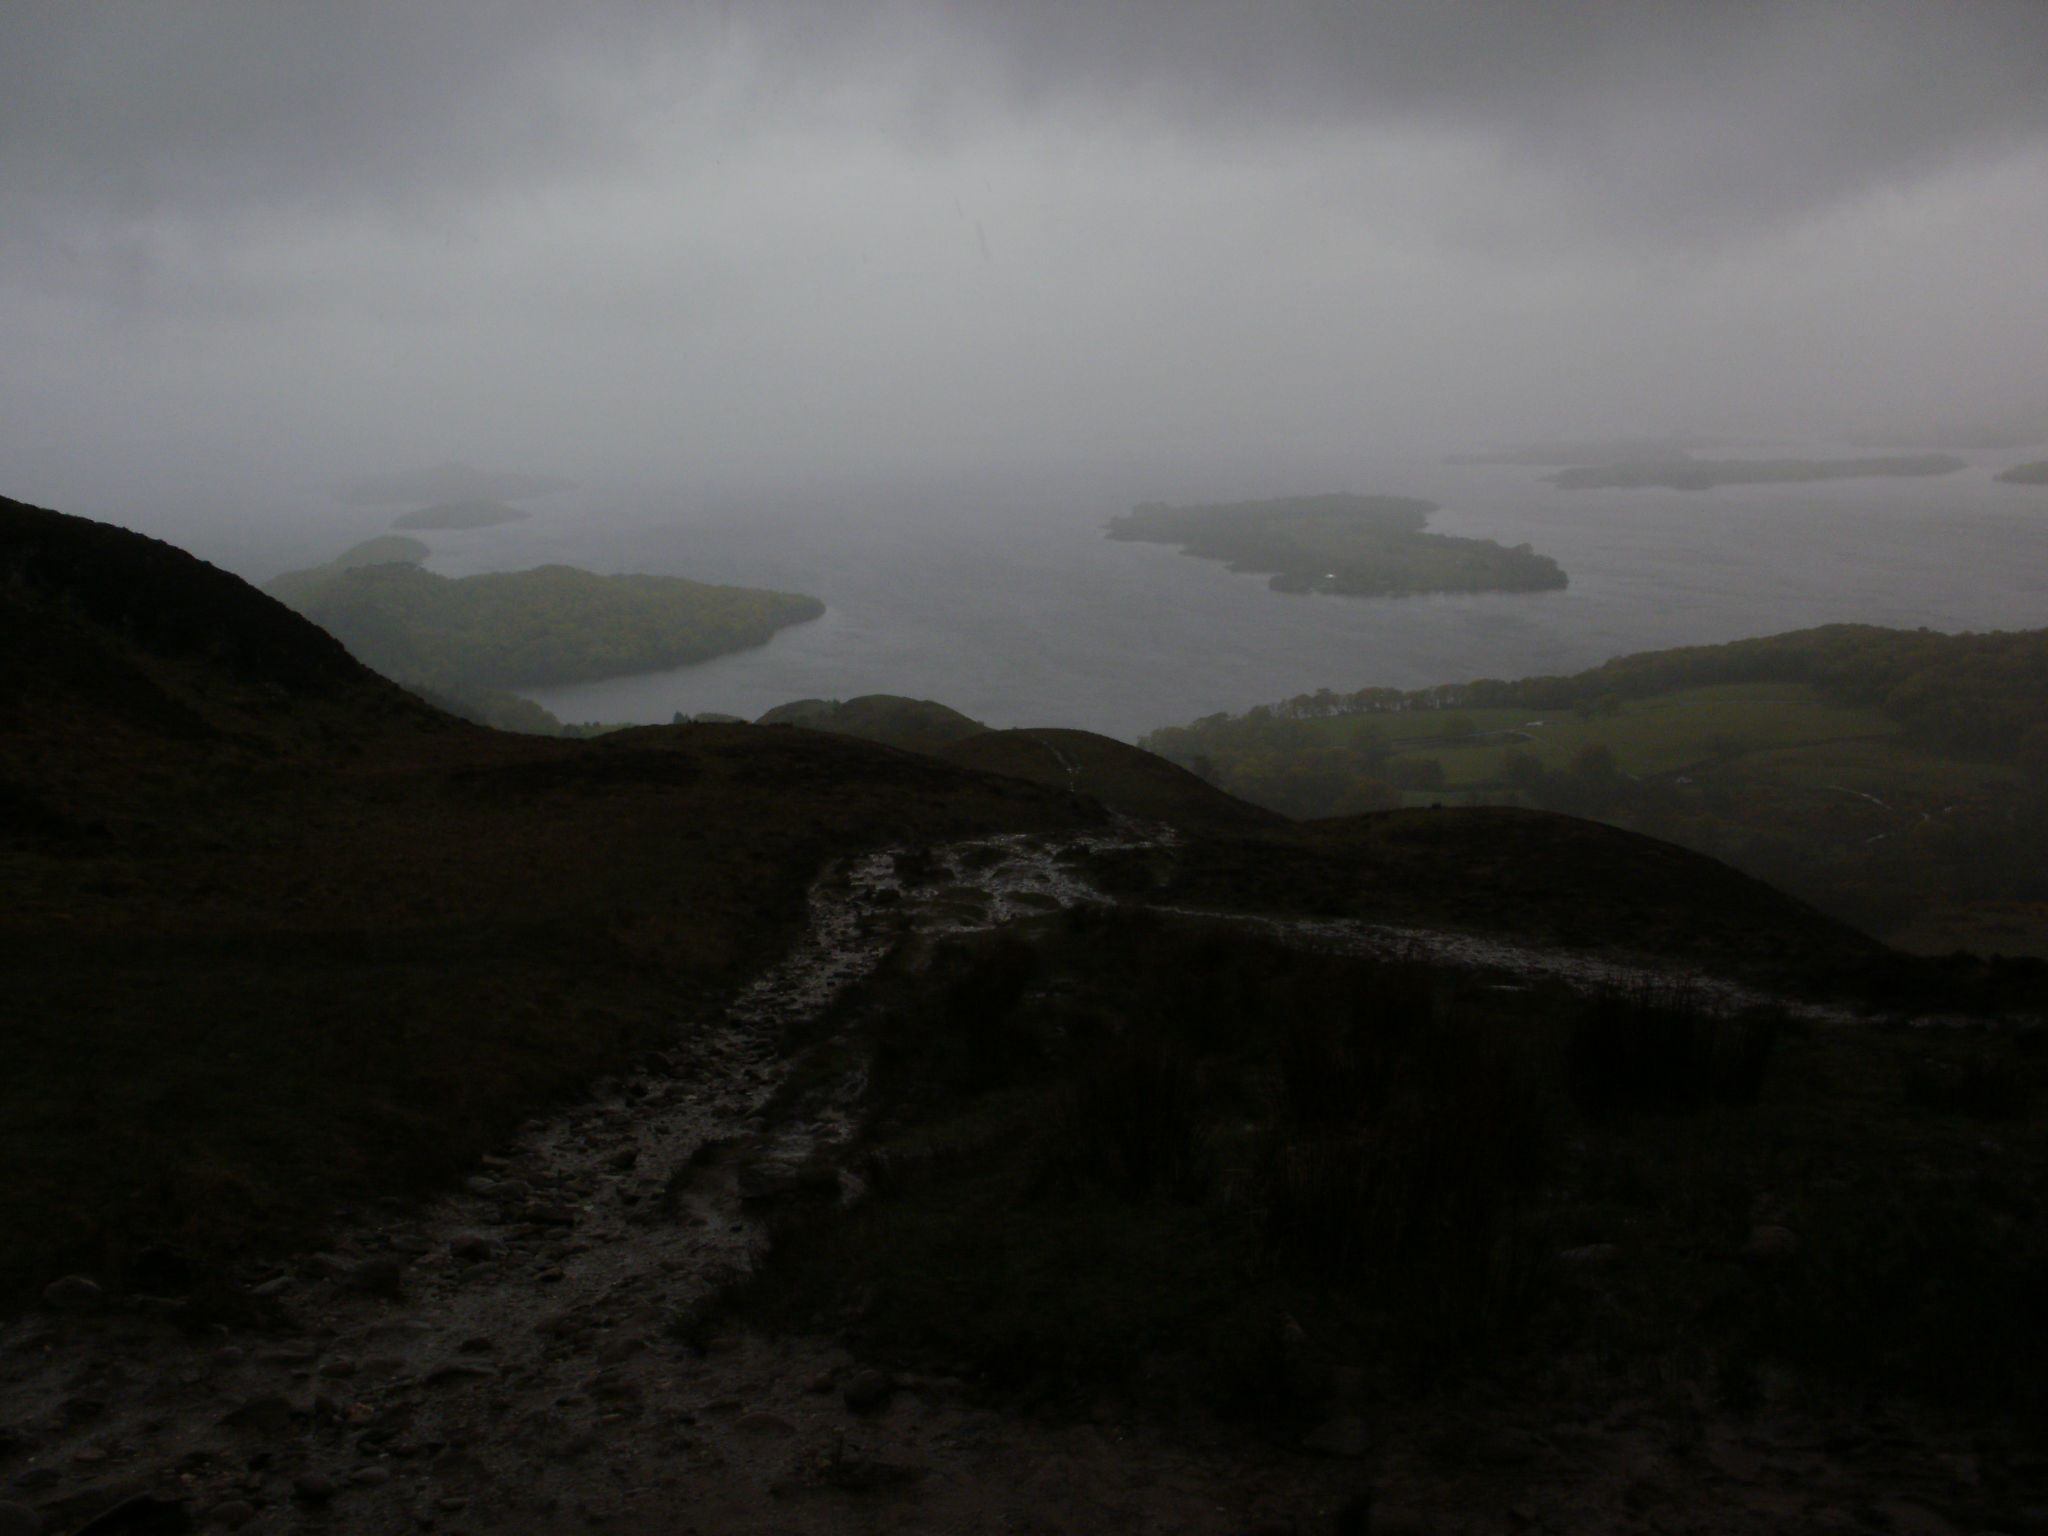 Some of the Loch Lomond islands from Conic Hill